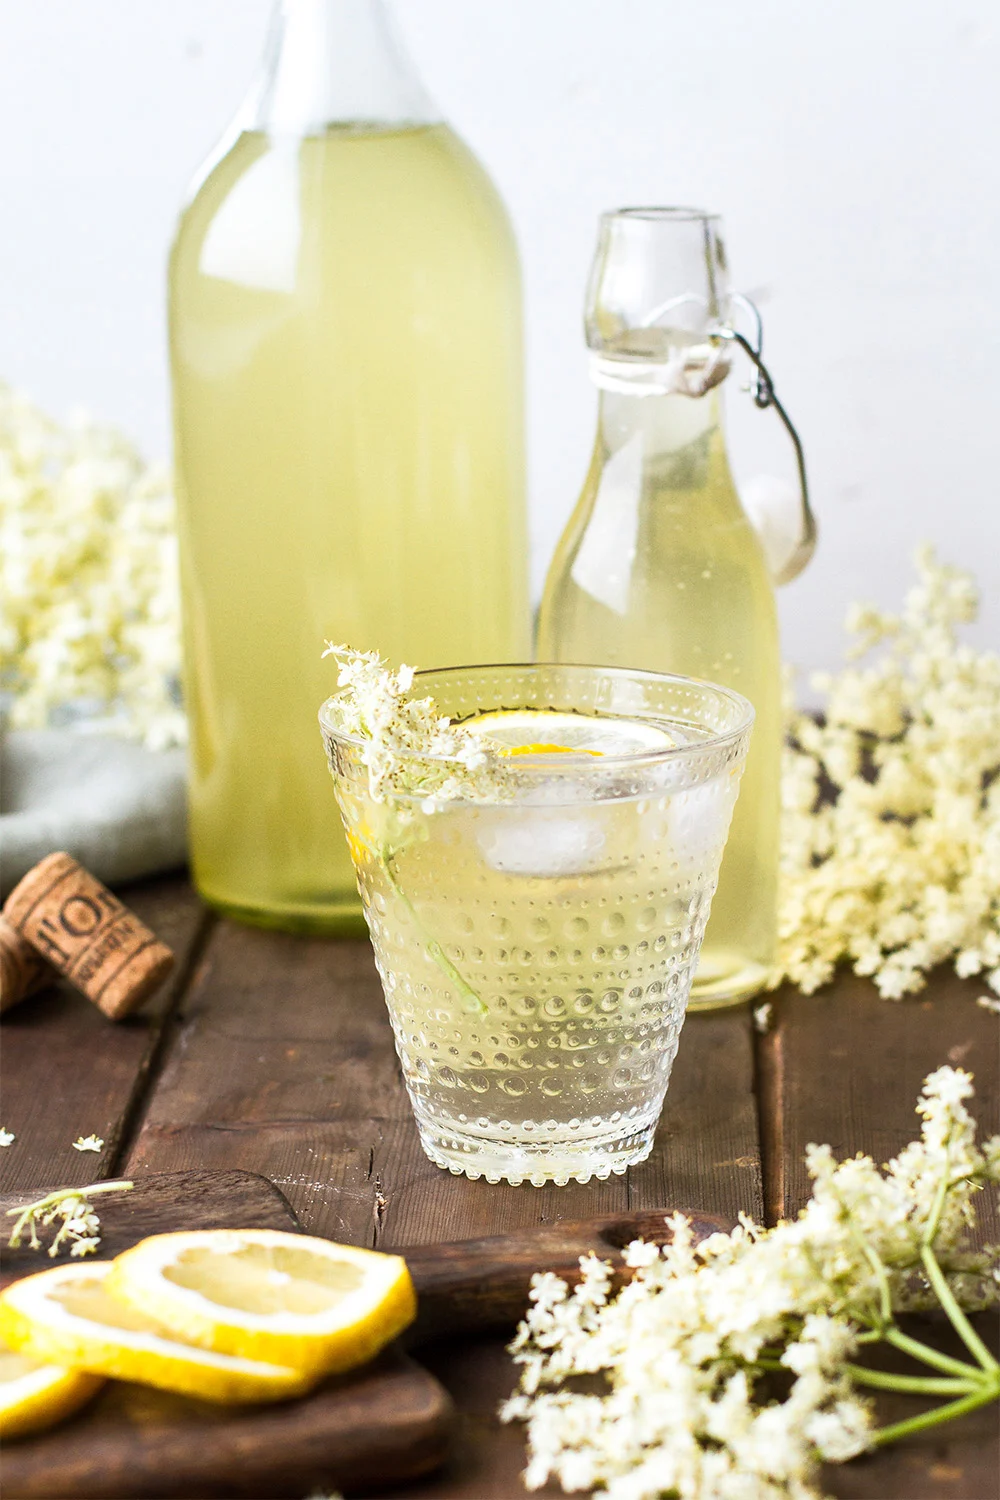 Homemade elderflower cordial in a clear glass with lemon wedge.